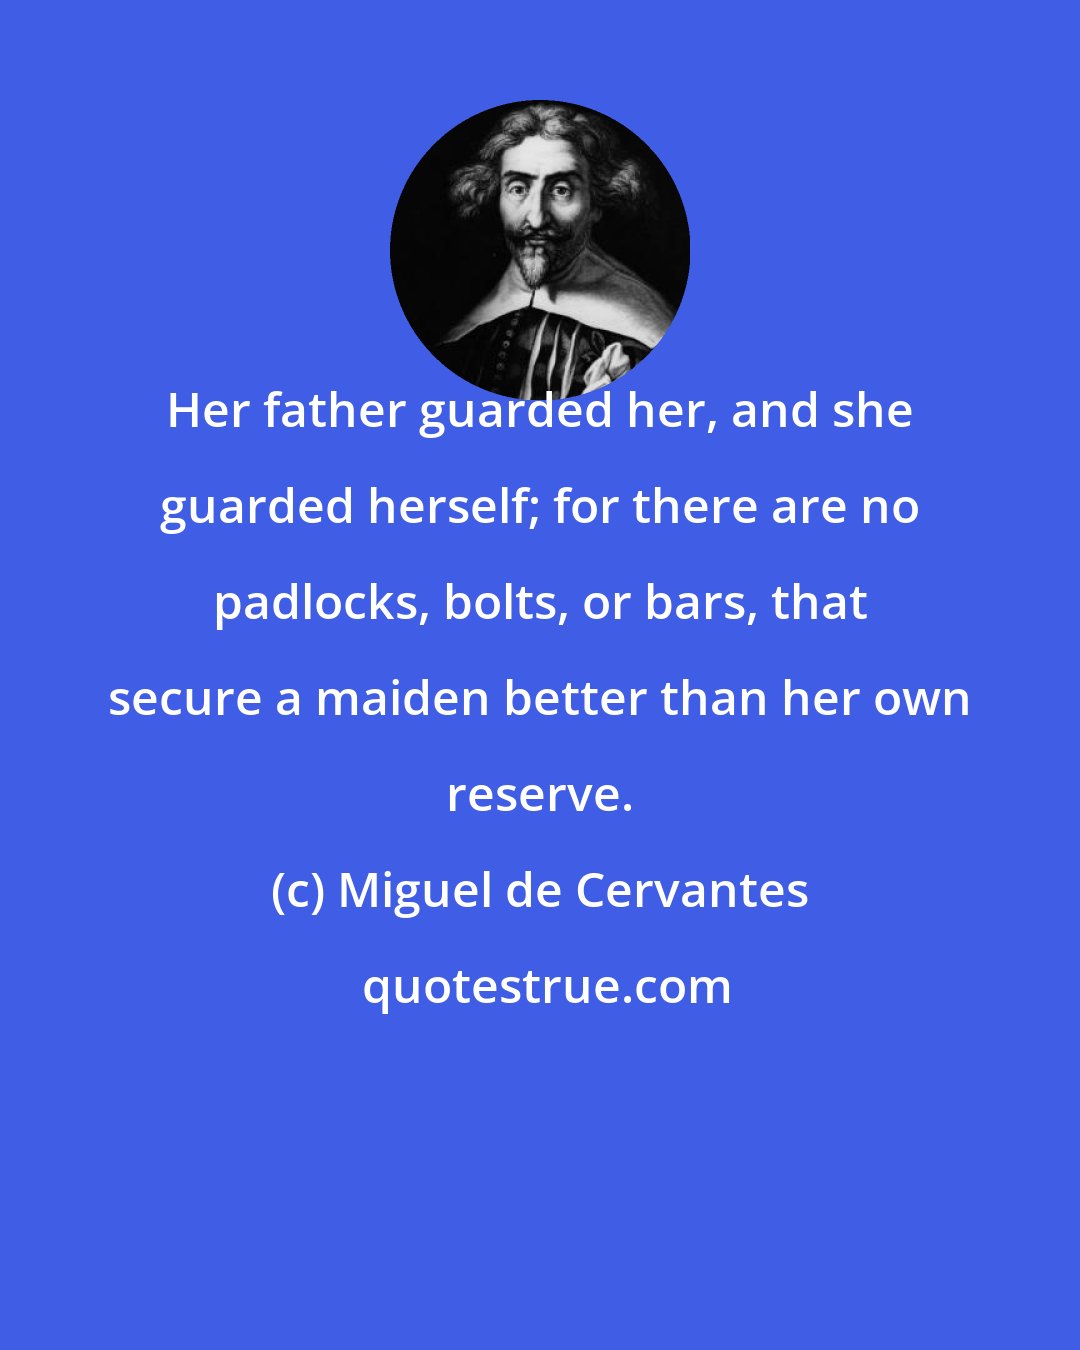 Miguel de Cervantes: Her father guarded her, and she guarded herself; for there are no padlocks, bolts, or bars, that secure a maiden better than her own reserve.